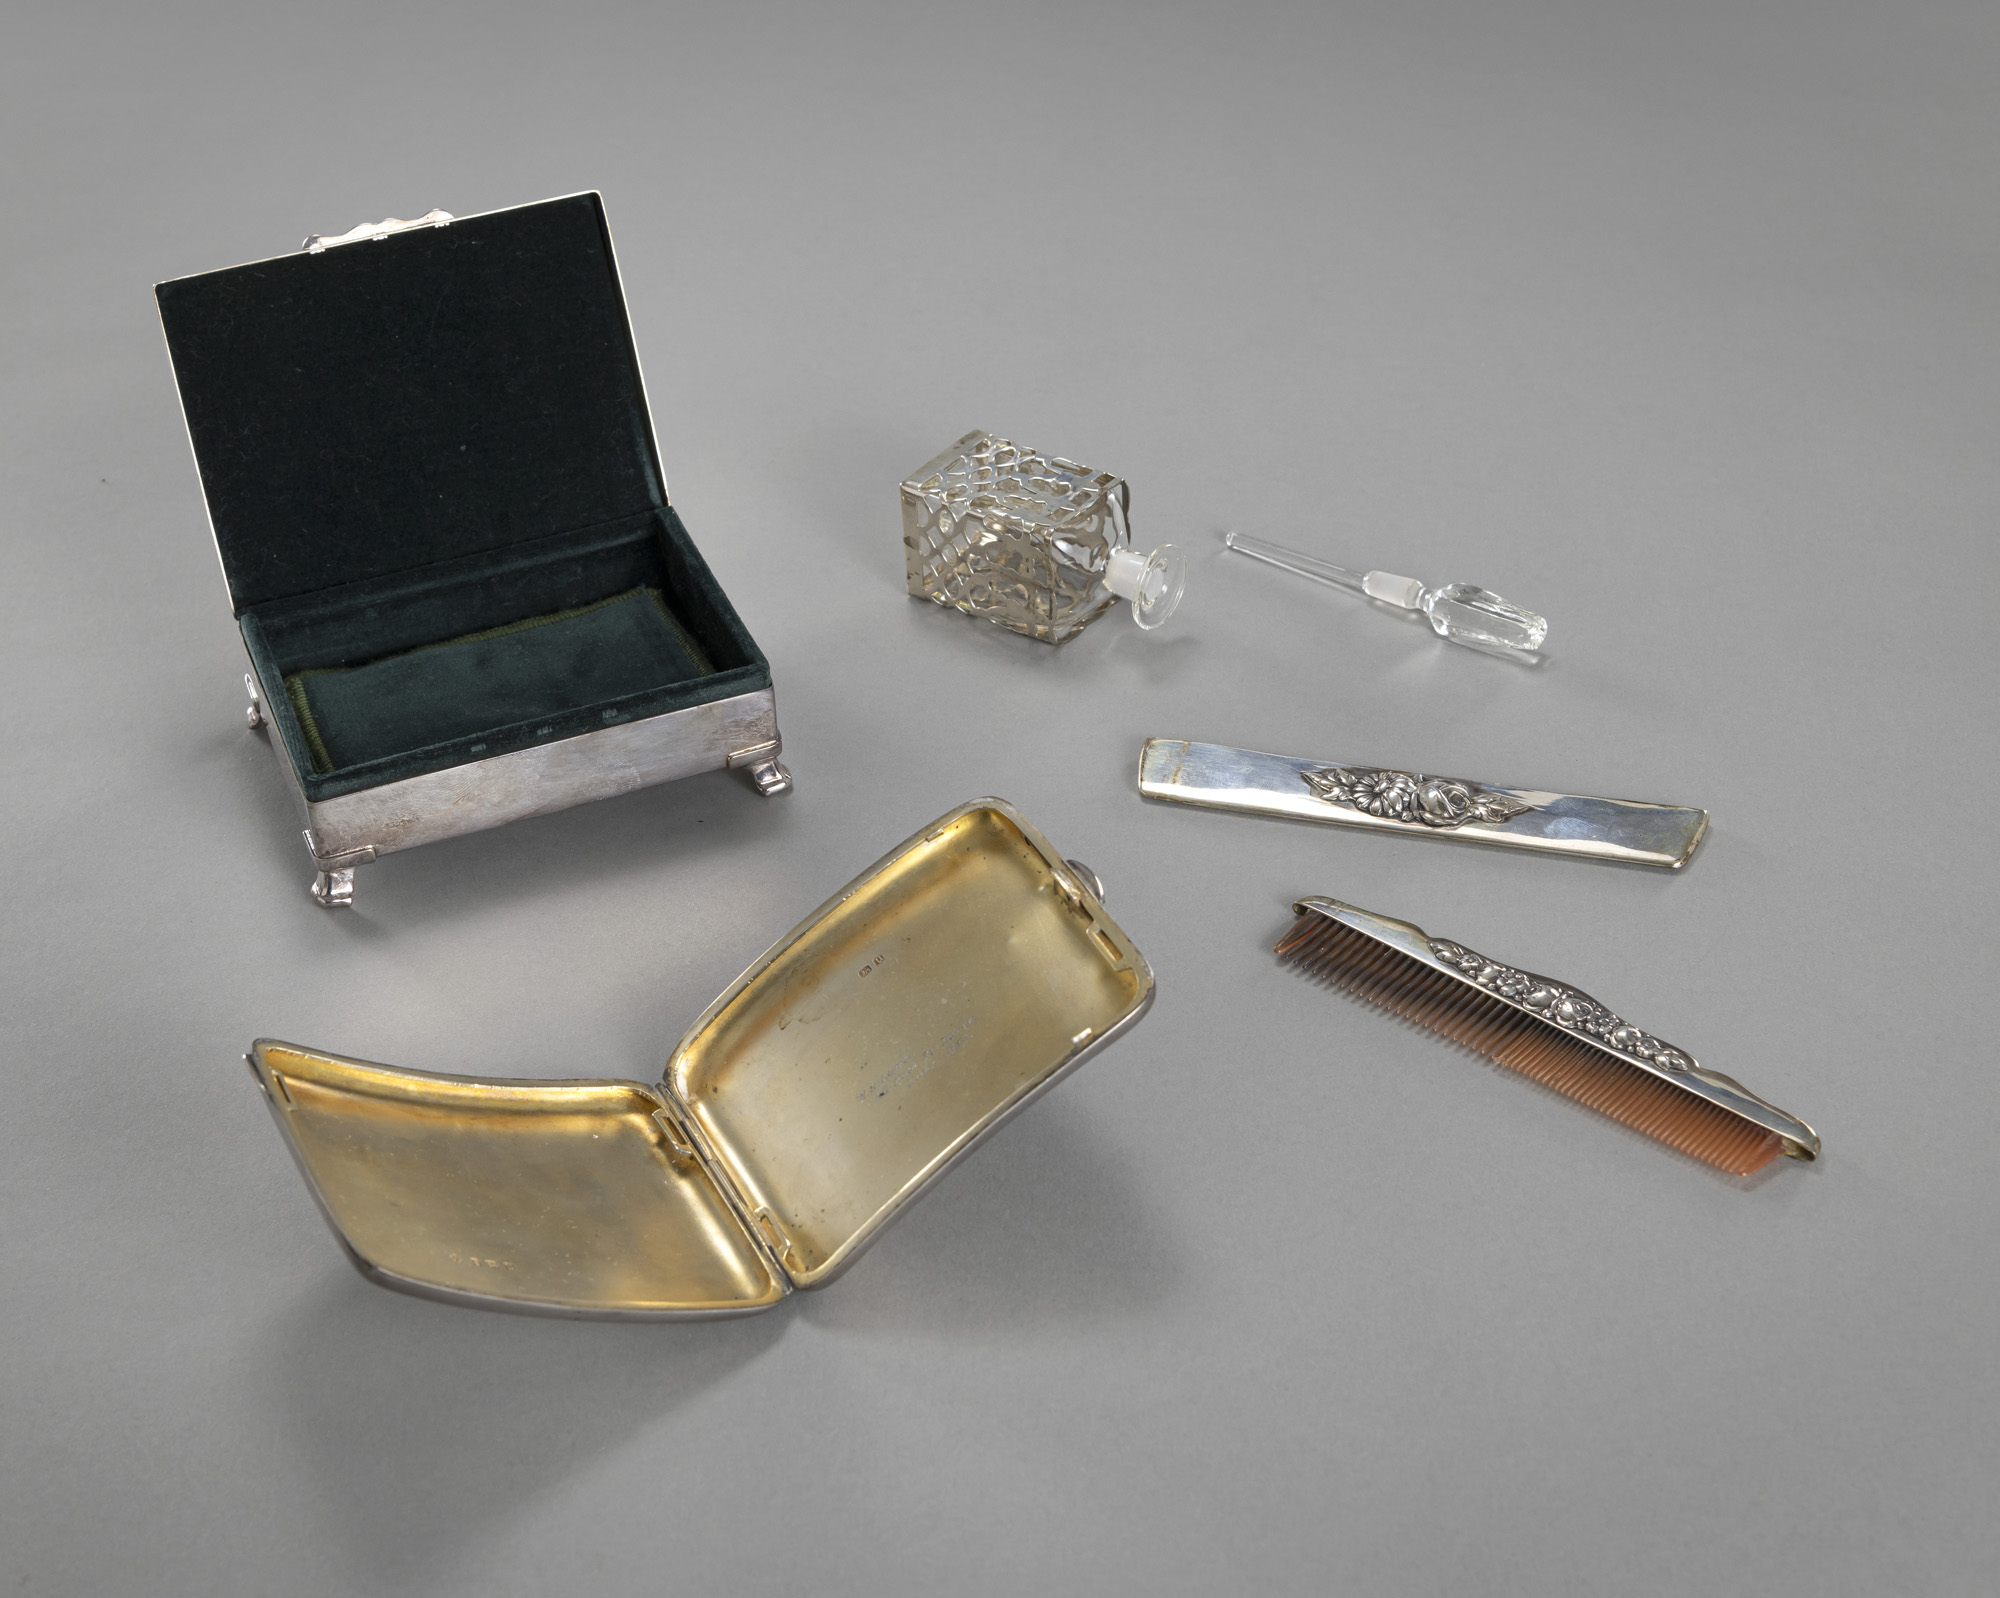 TWO CIGARETTE CASES; A PERFUME FLACON AND A COMB - Image 4 of 4